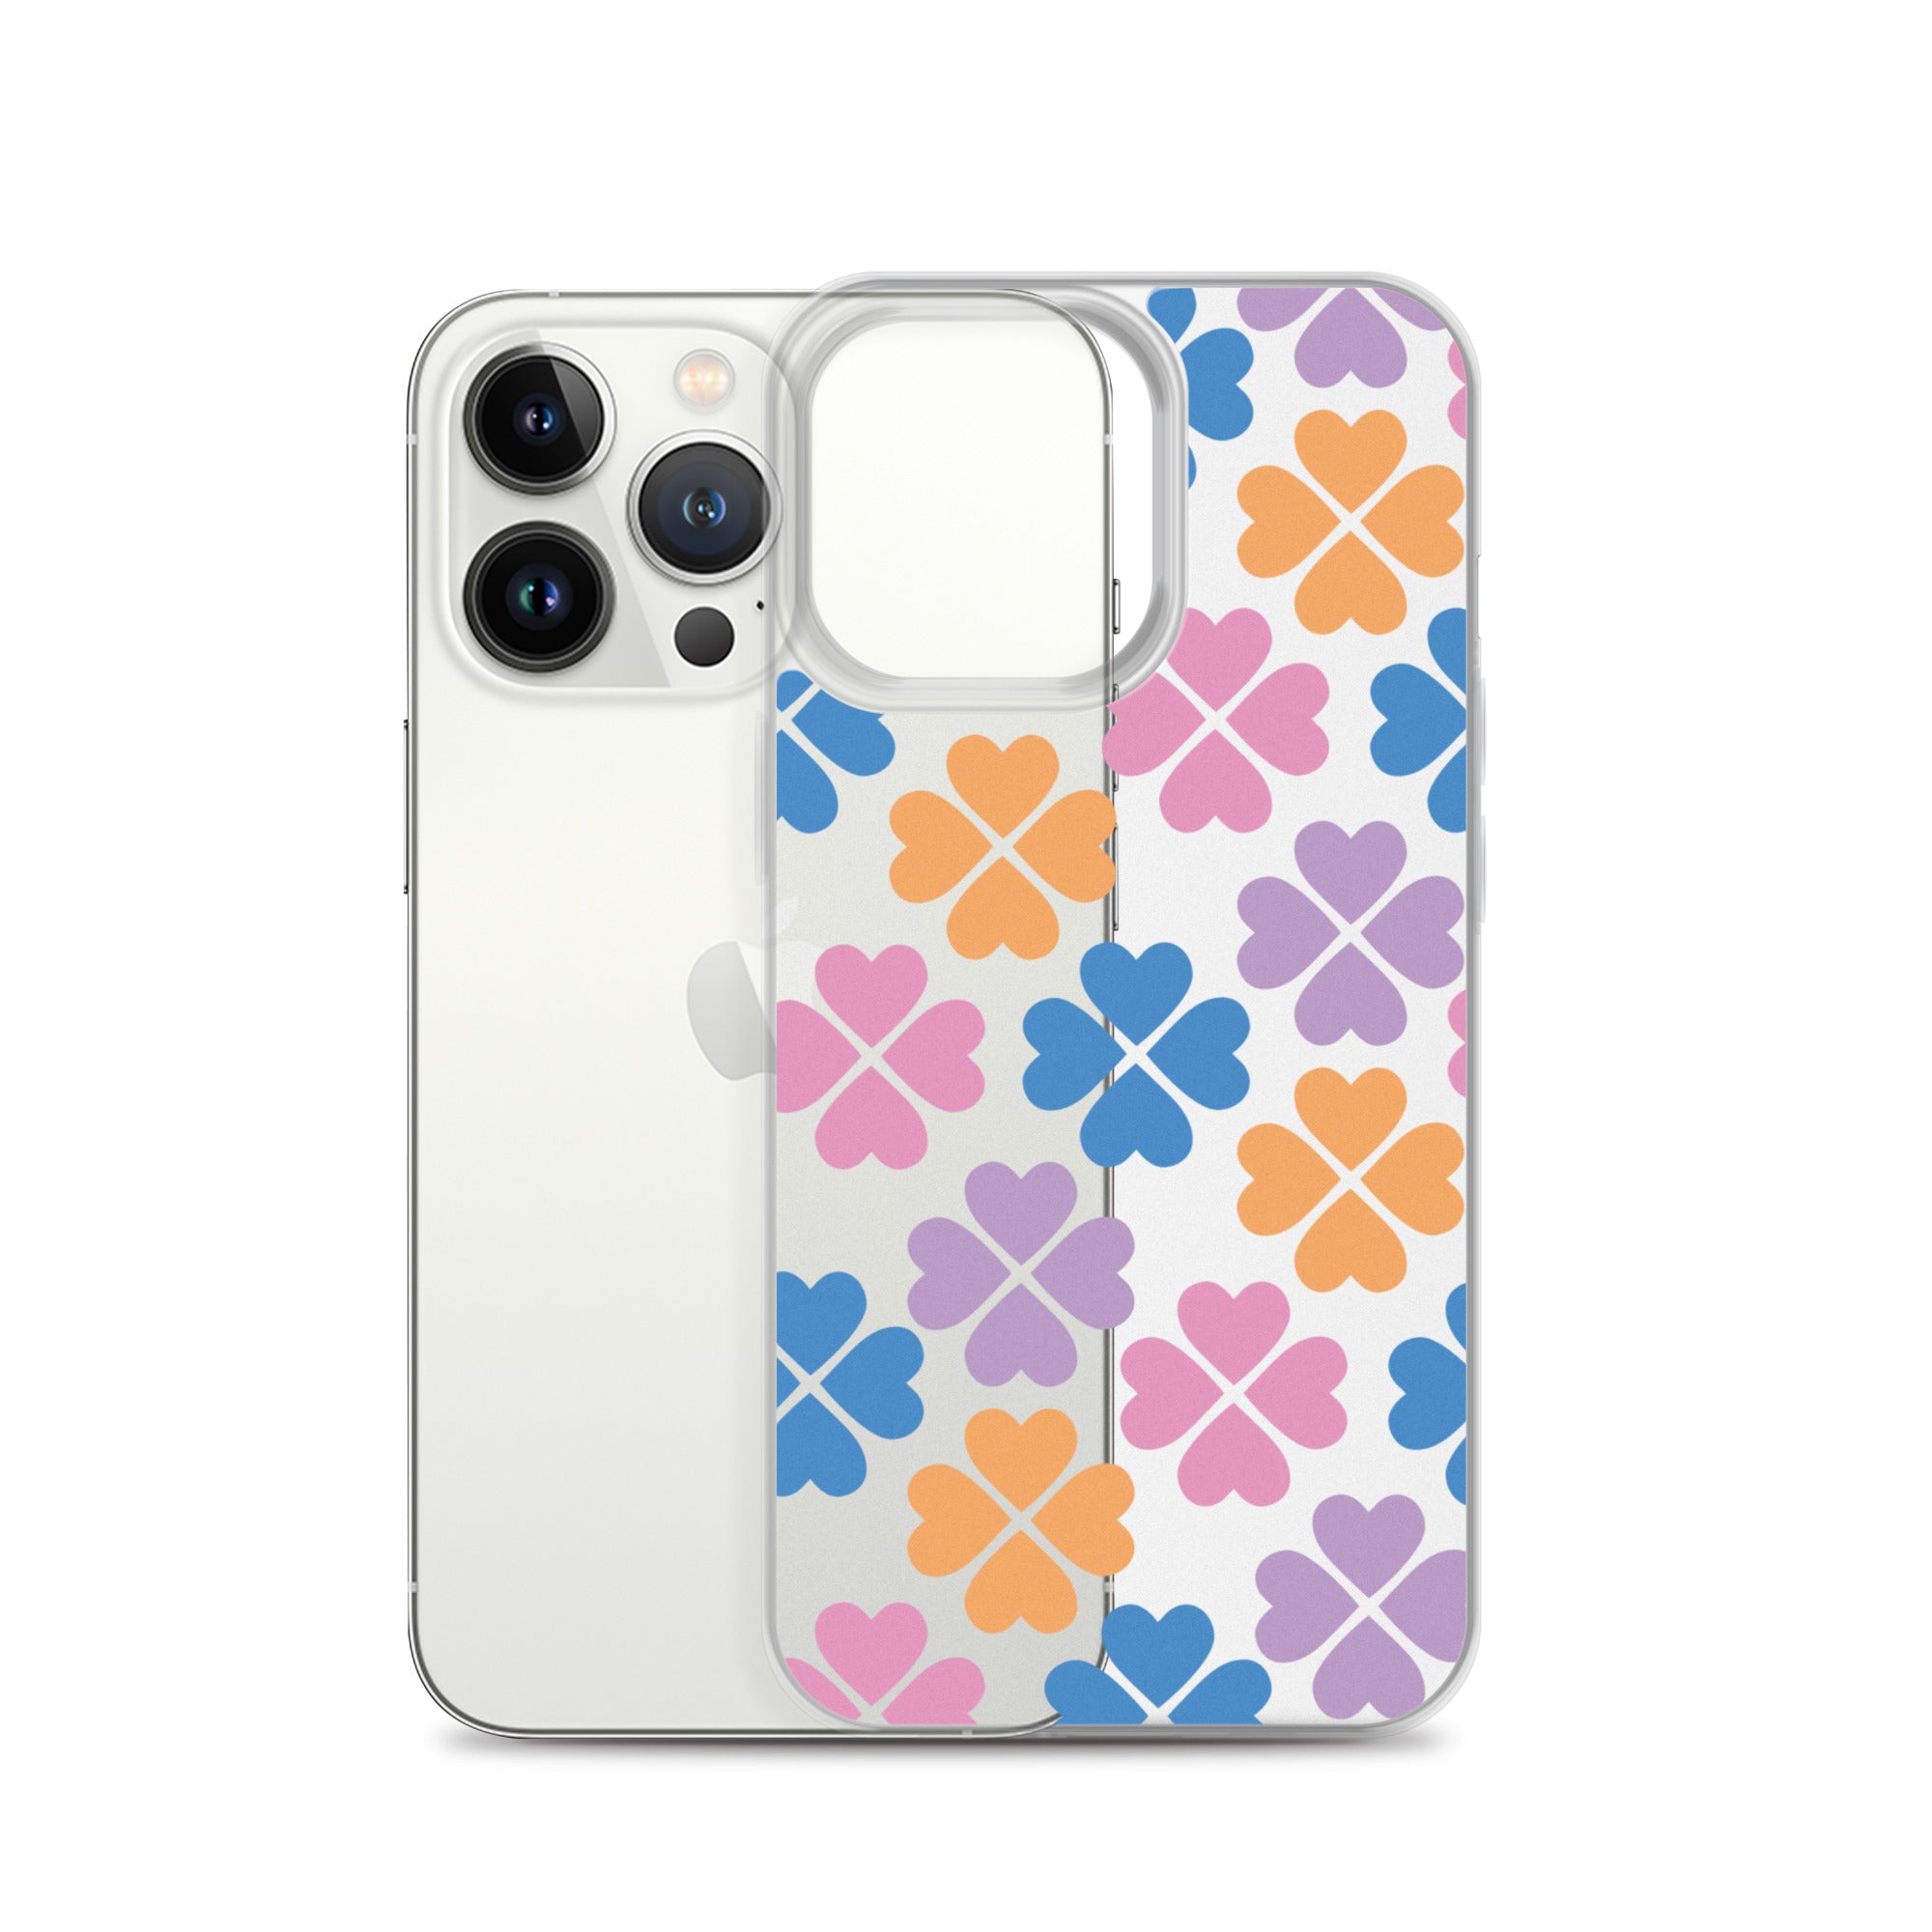 Cute Graphic Flower iPhone Case